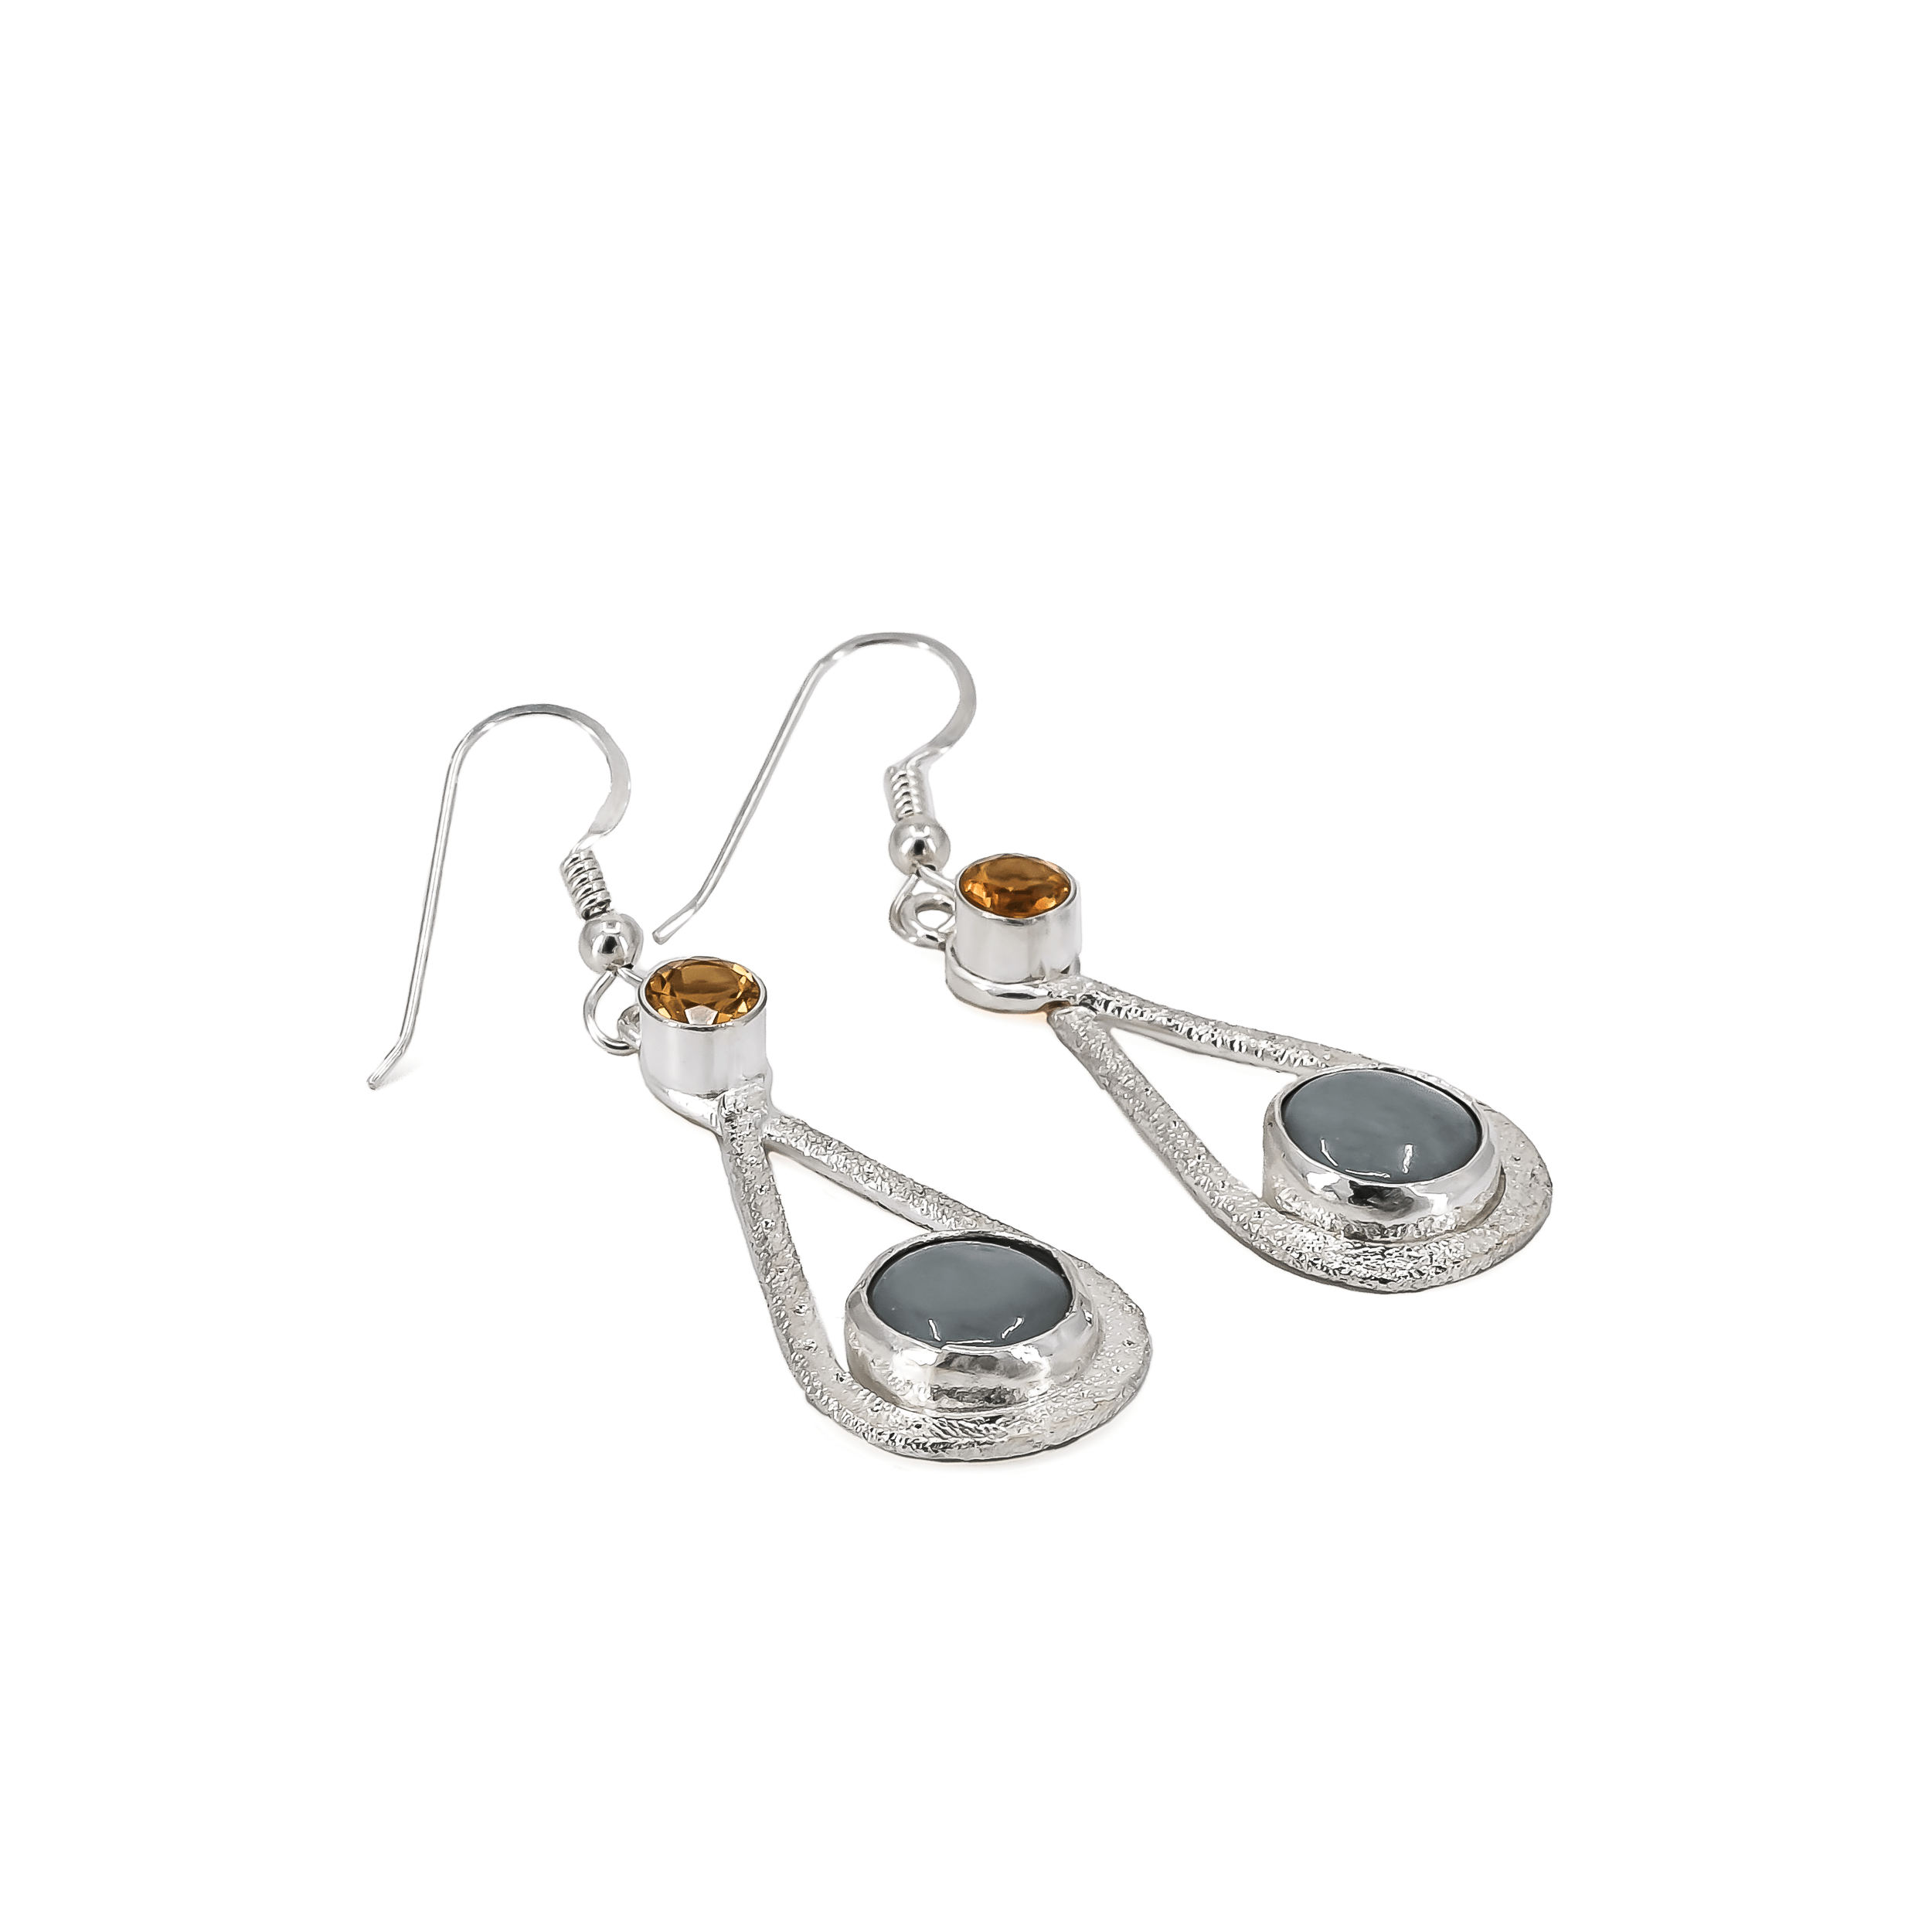 tear drop shaped sterling silver dangle earrings, featuring round faceted golden citrine stones on top and round pastel green jade stones on the bottom. The earrings have a stardust texture all the way through.